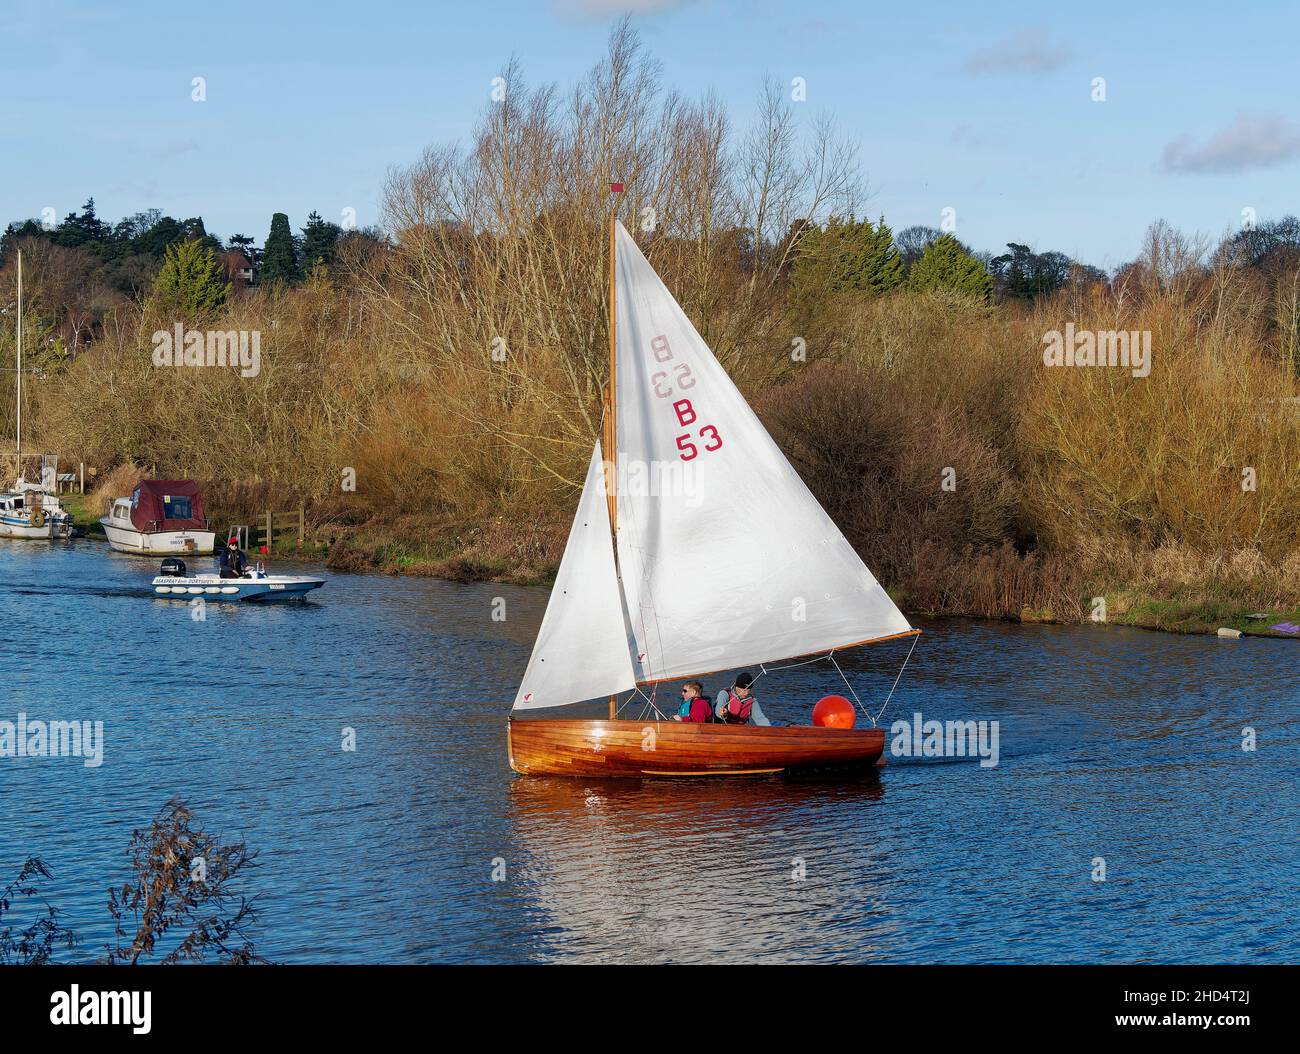 Norfolk 14 foot One Design sailing dinghy, a classic sailboat from1931 with a mahogany clinker built hull and gunter rig seen on River Yare Norwich. Stock Photo